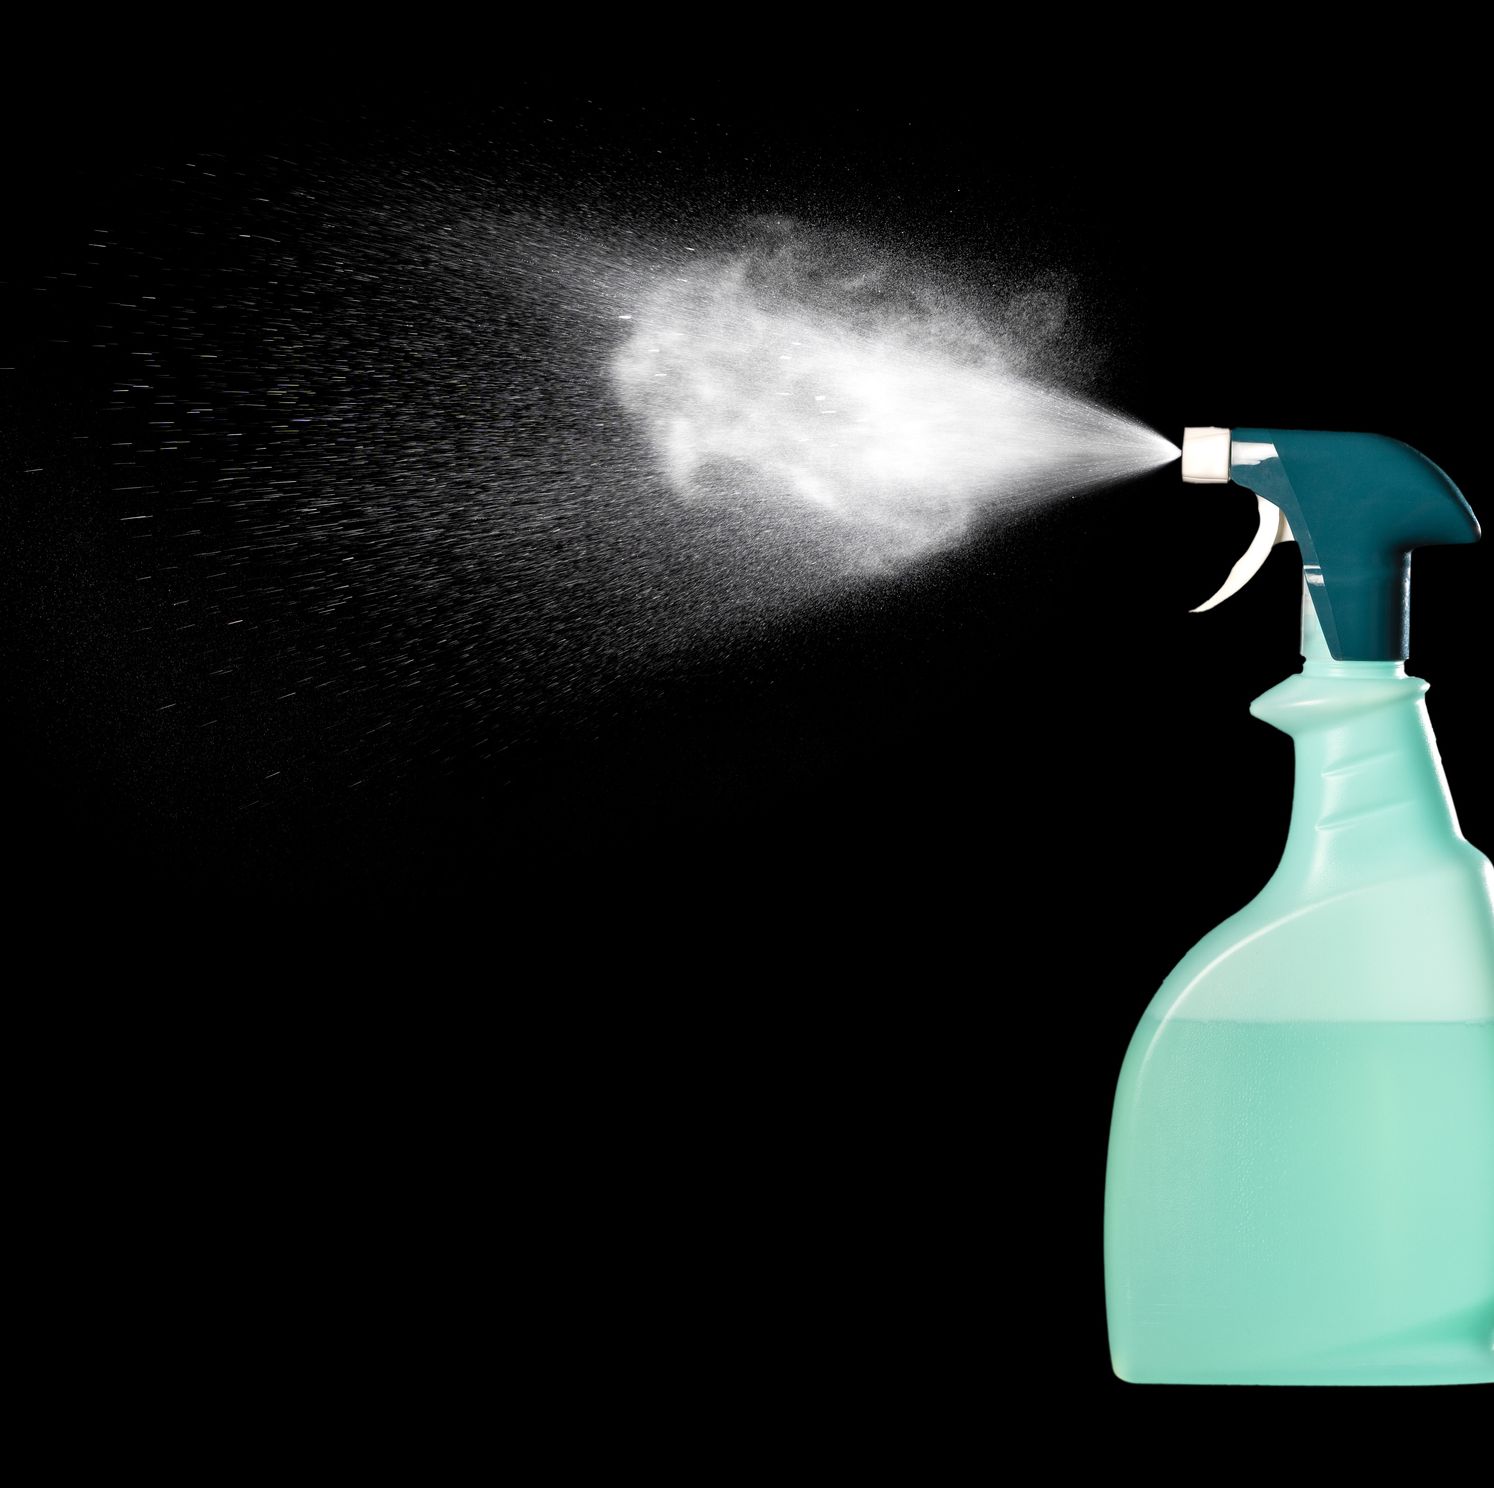 Read This Before You Buy Another Household Antimicrobial Spray